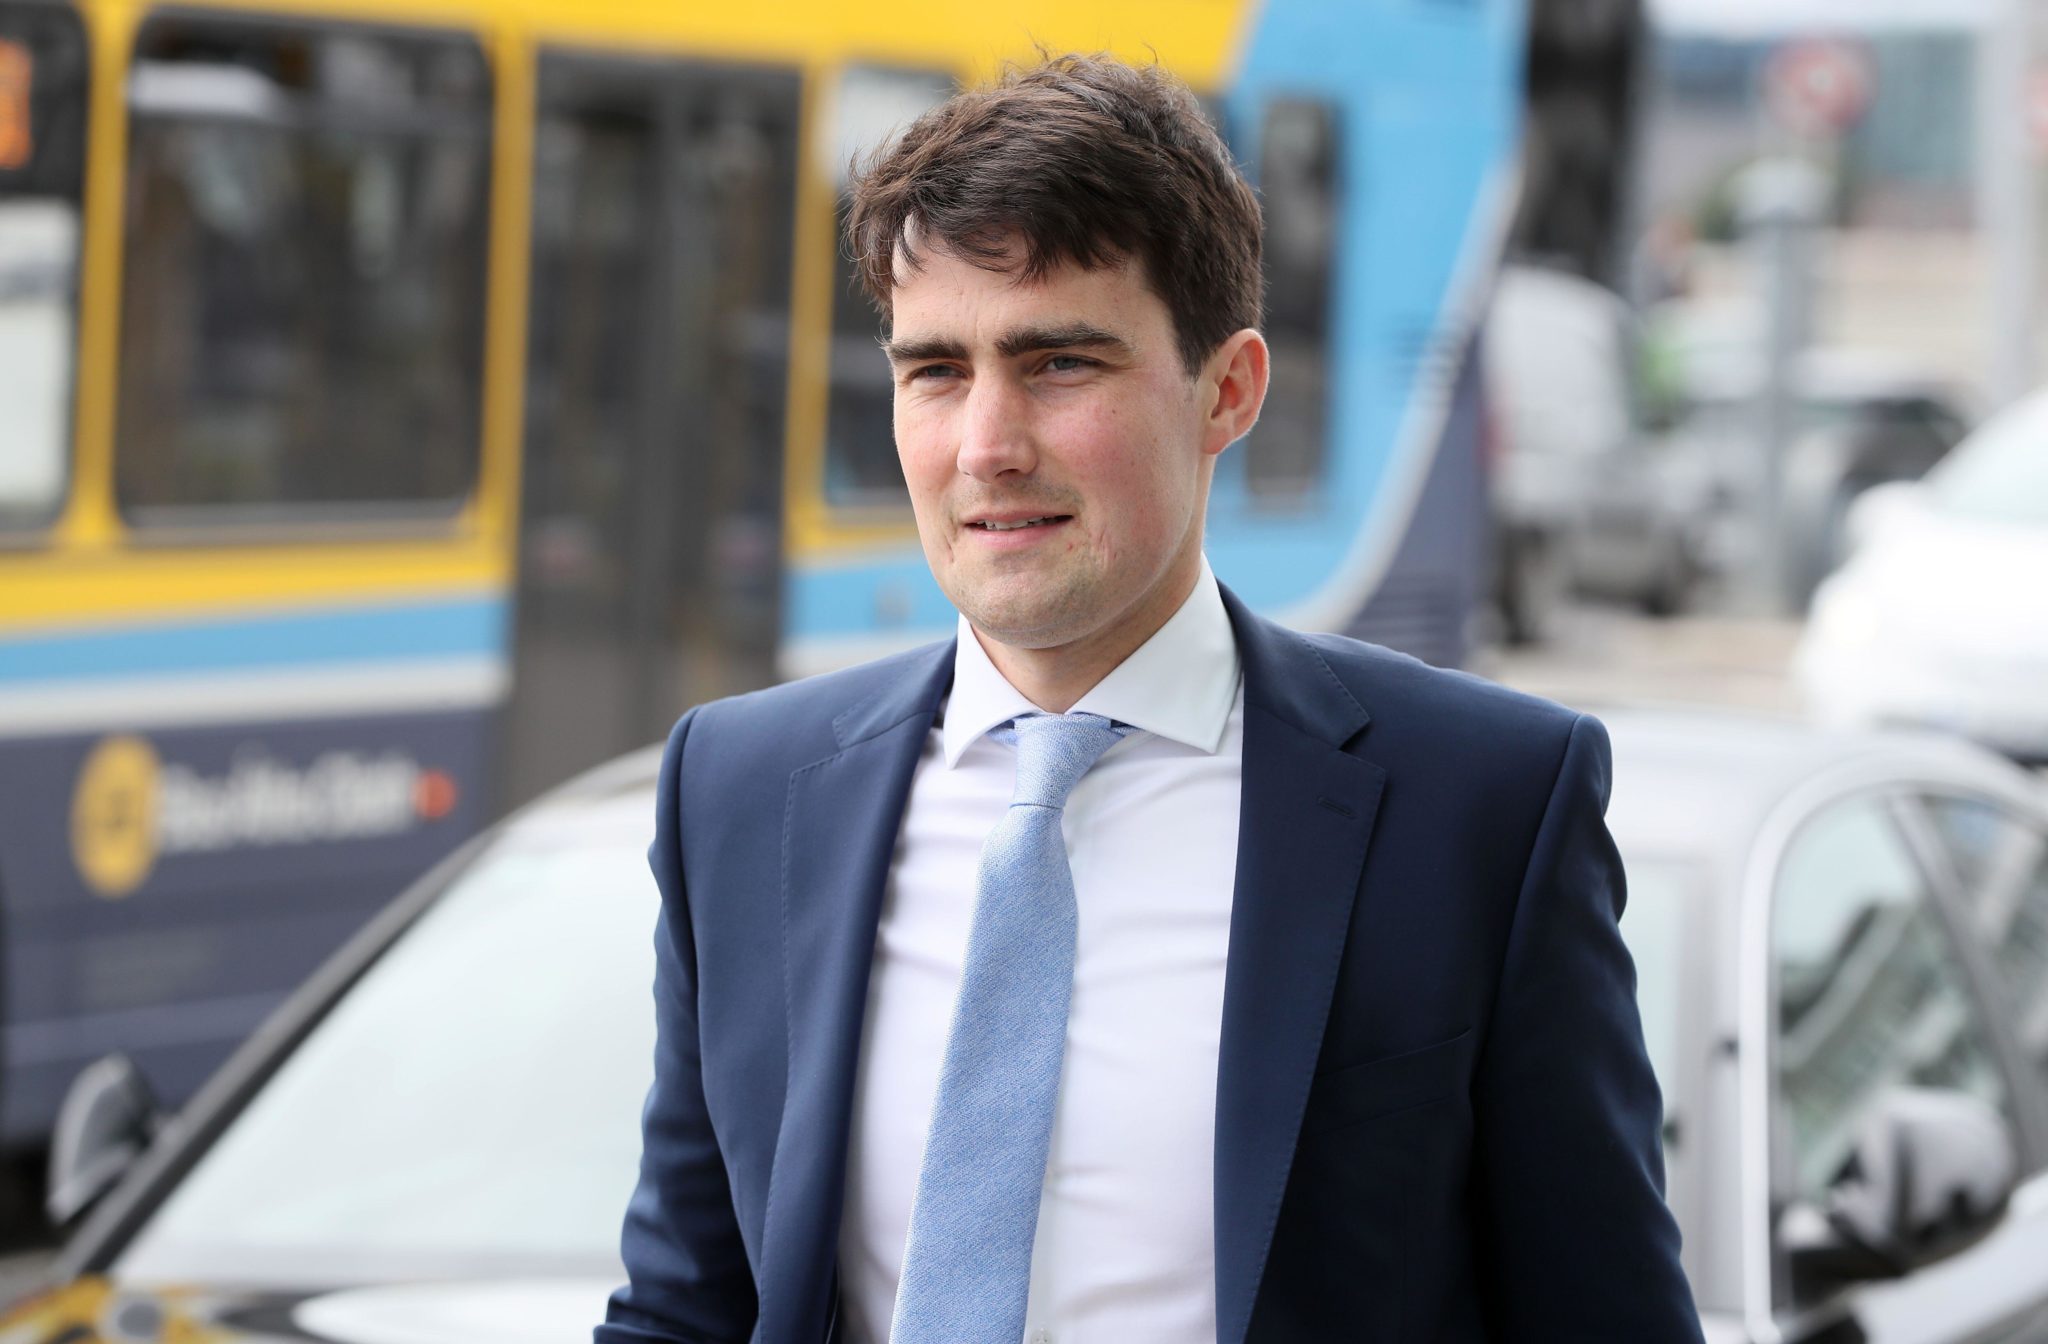 Government Chief Whip Jack Chambers arriving at the Convention Centre Dublin for a Dáil session in July 2020.